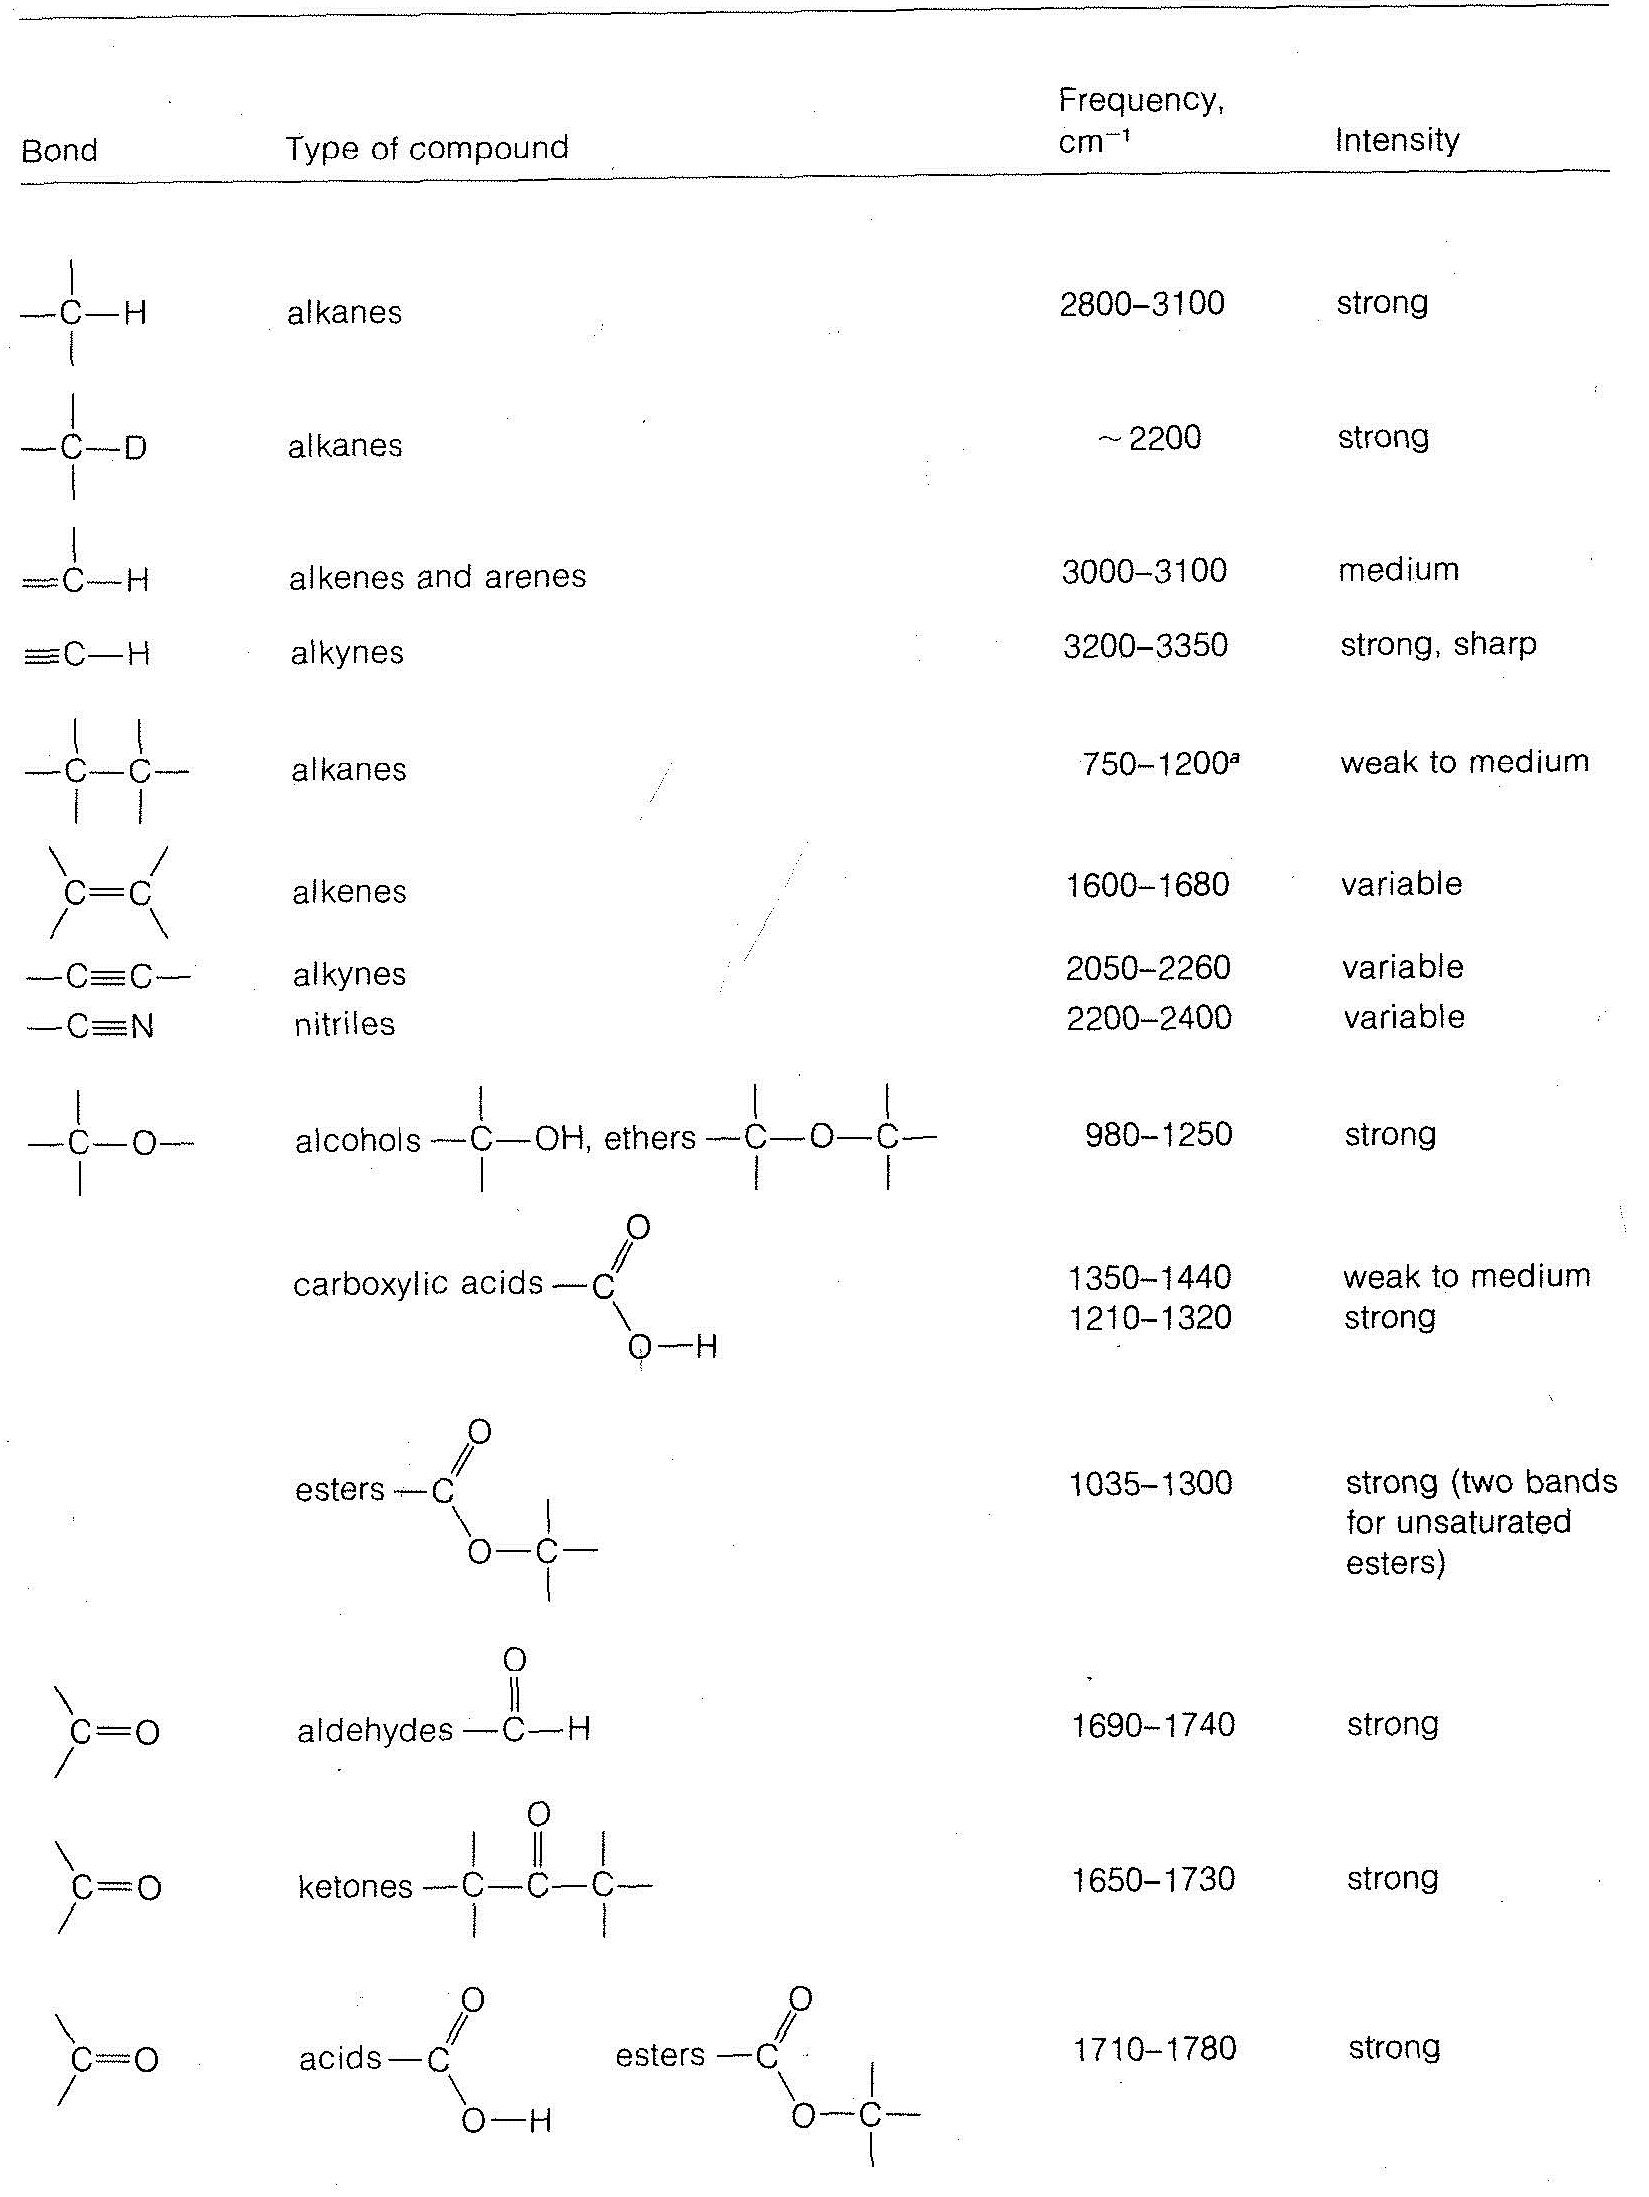 Ir Functional Groups And Frequencies Chart